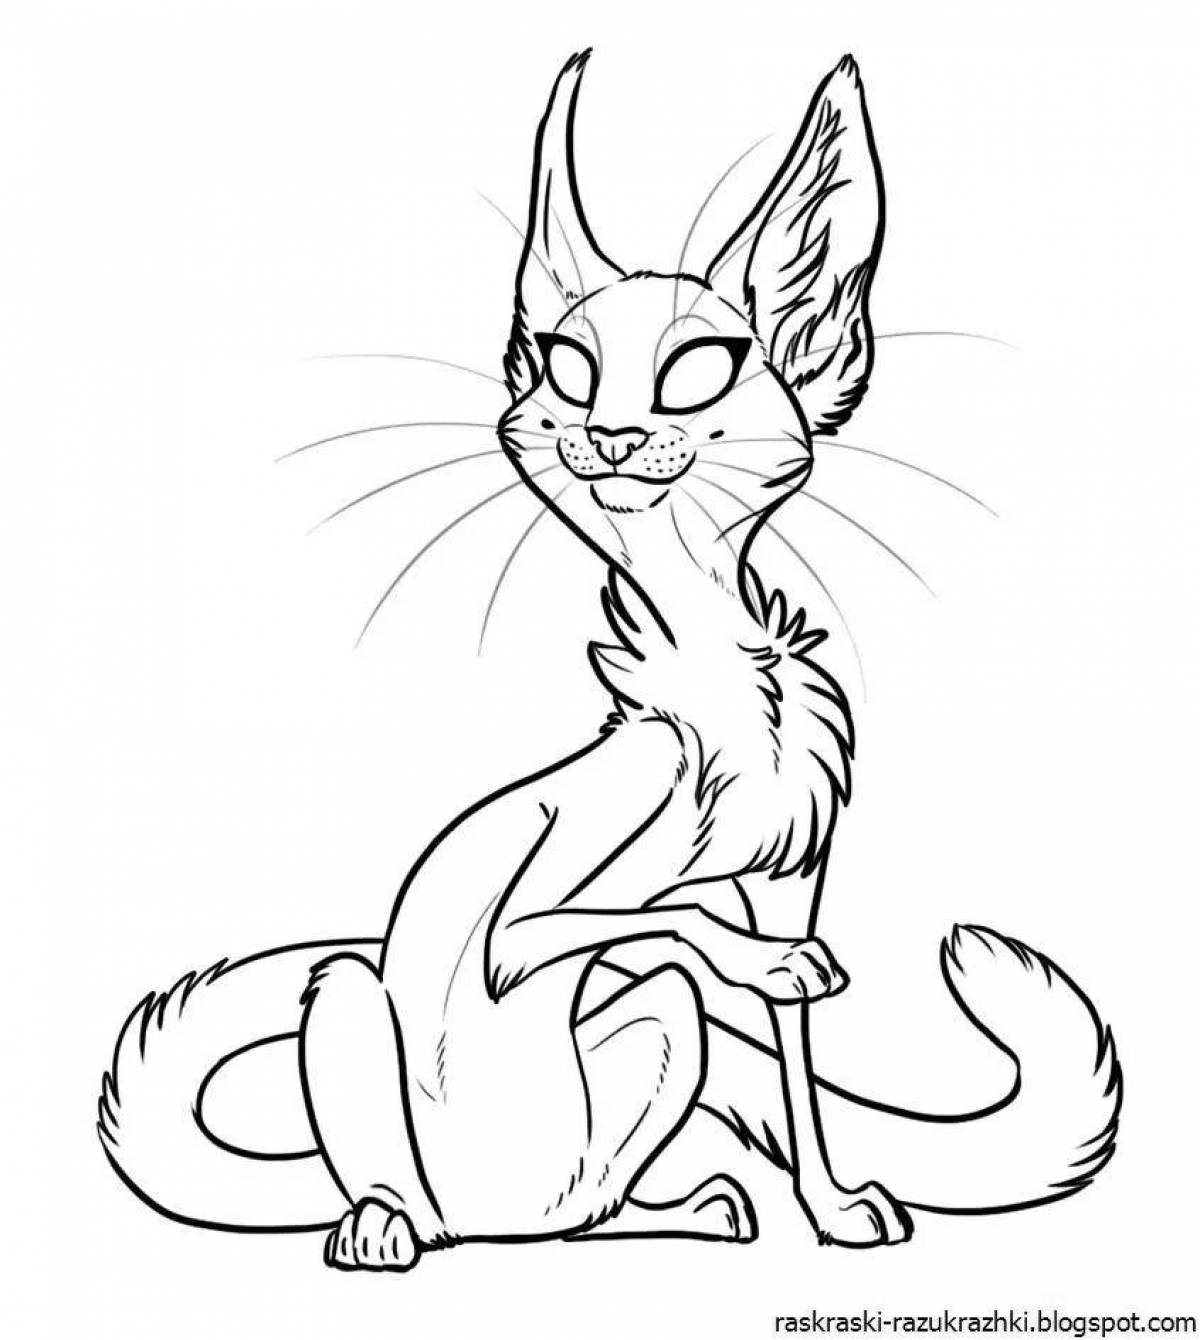 Courageous coloring pages warrior cats cat